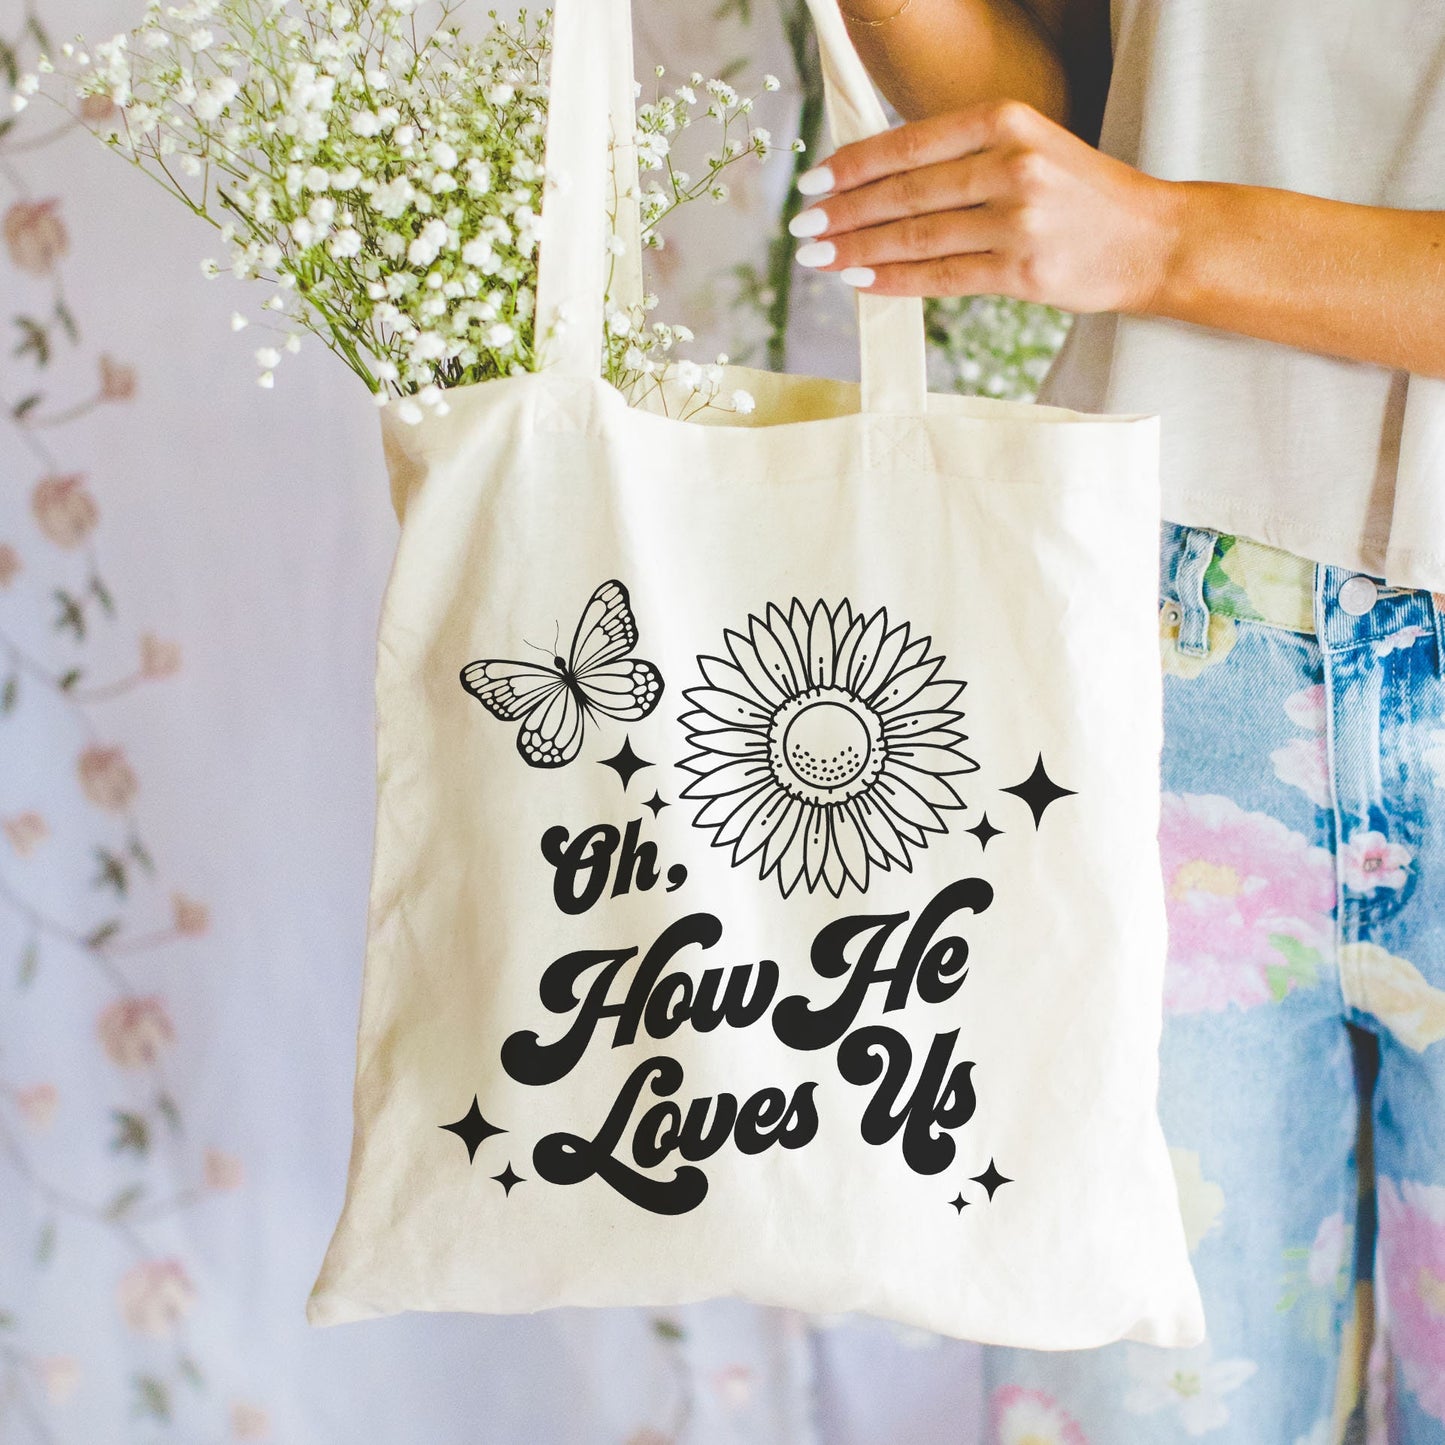 OH HOW HE LOVES US TOTE BAG